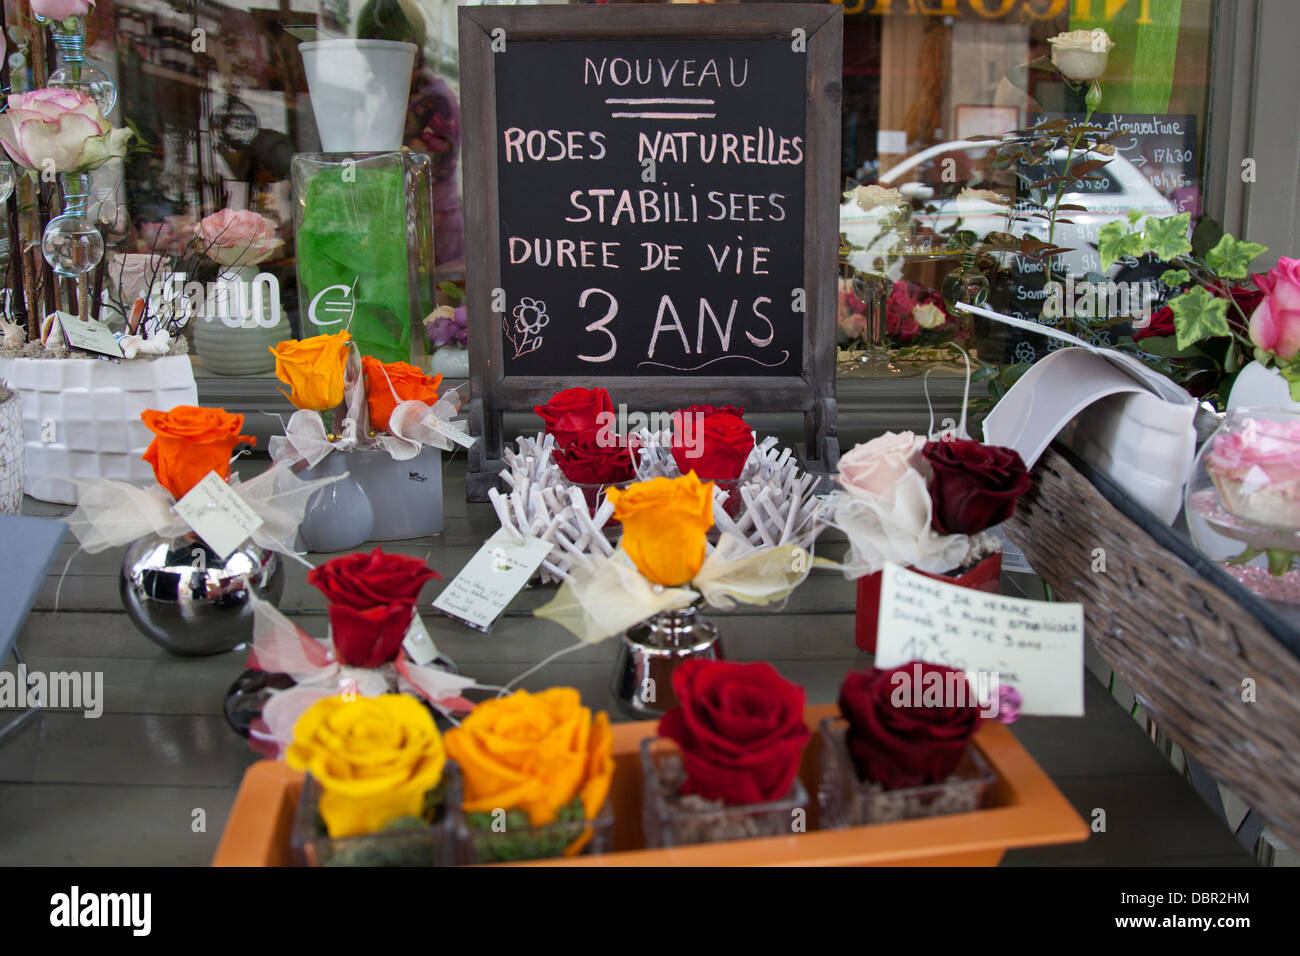 Long life roses on sale outside a florists in Tours, France. Stock Photo